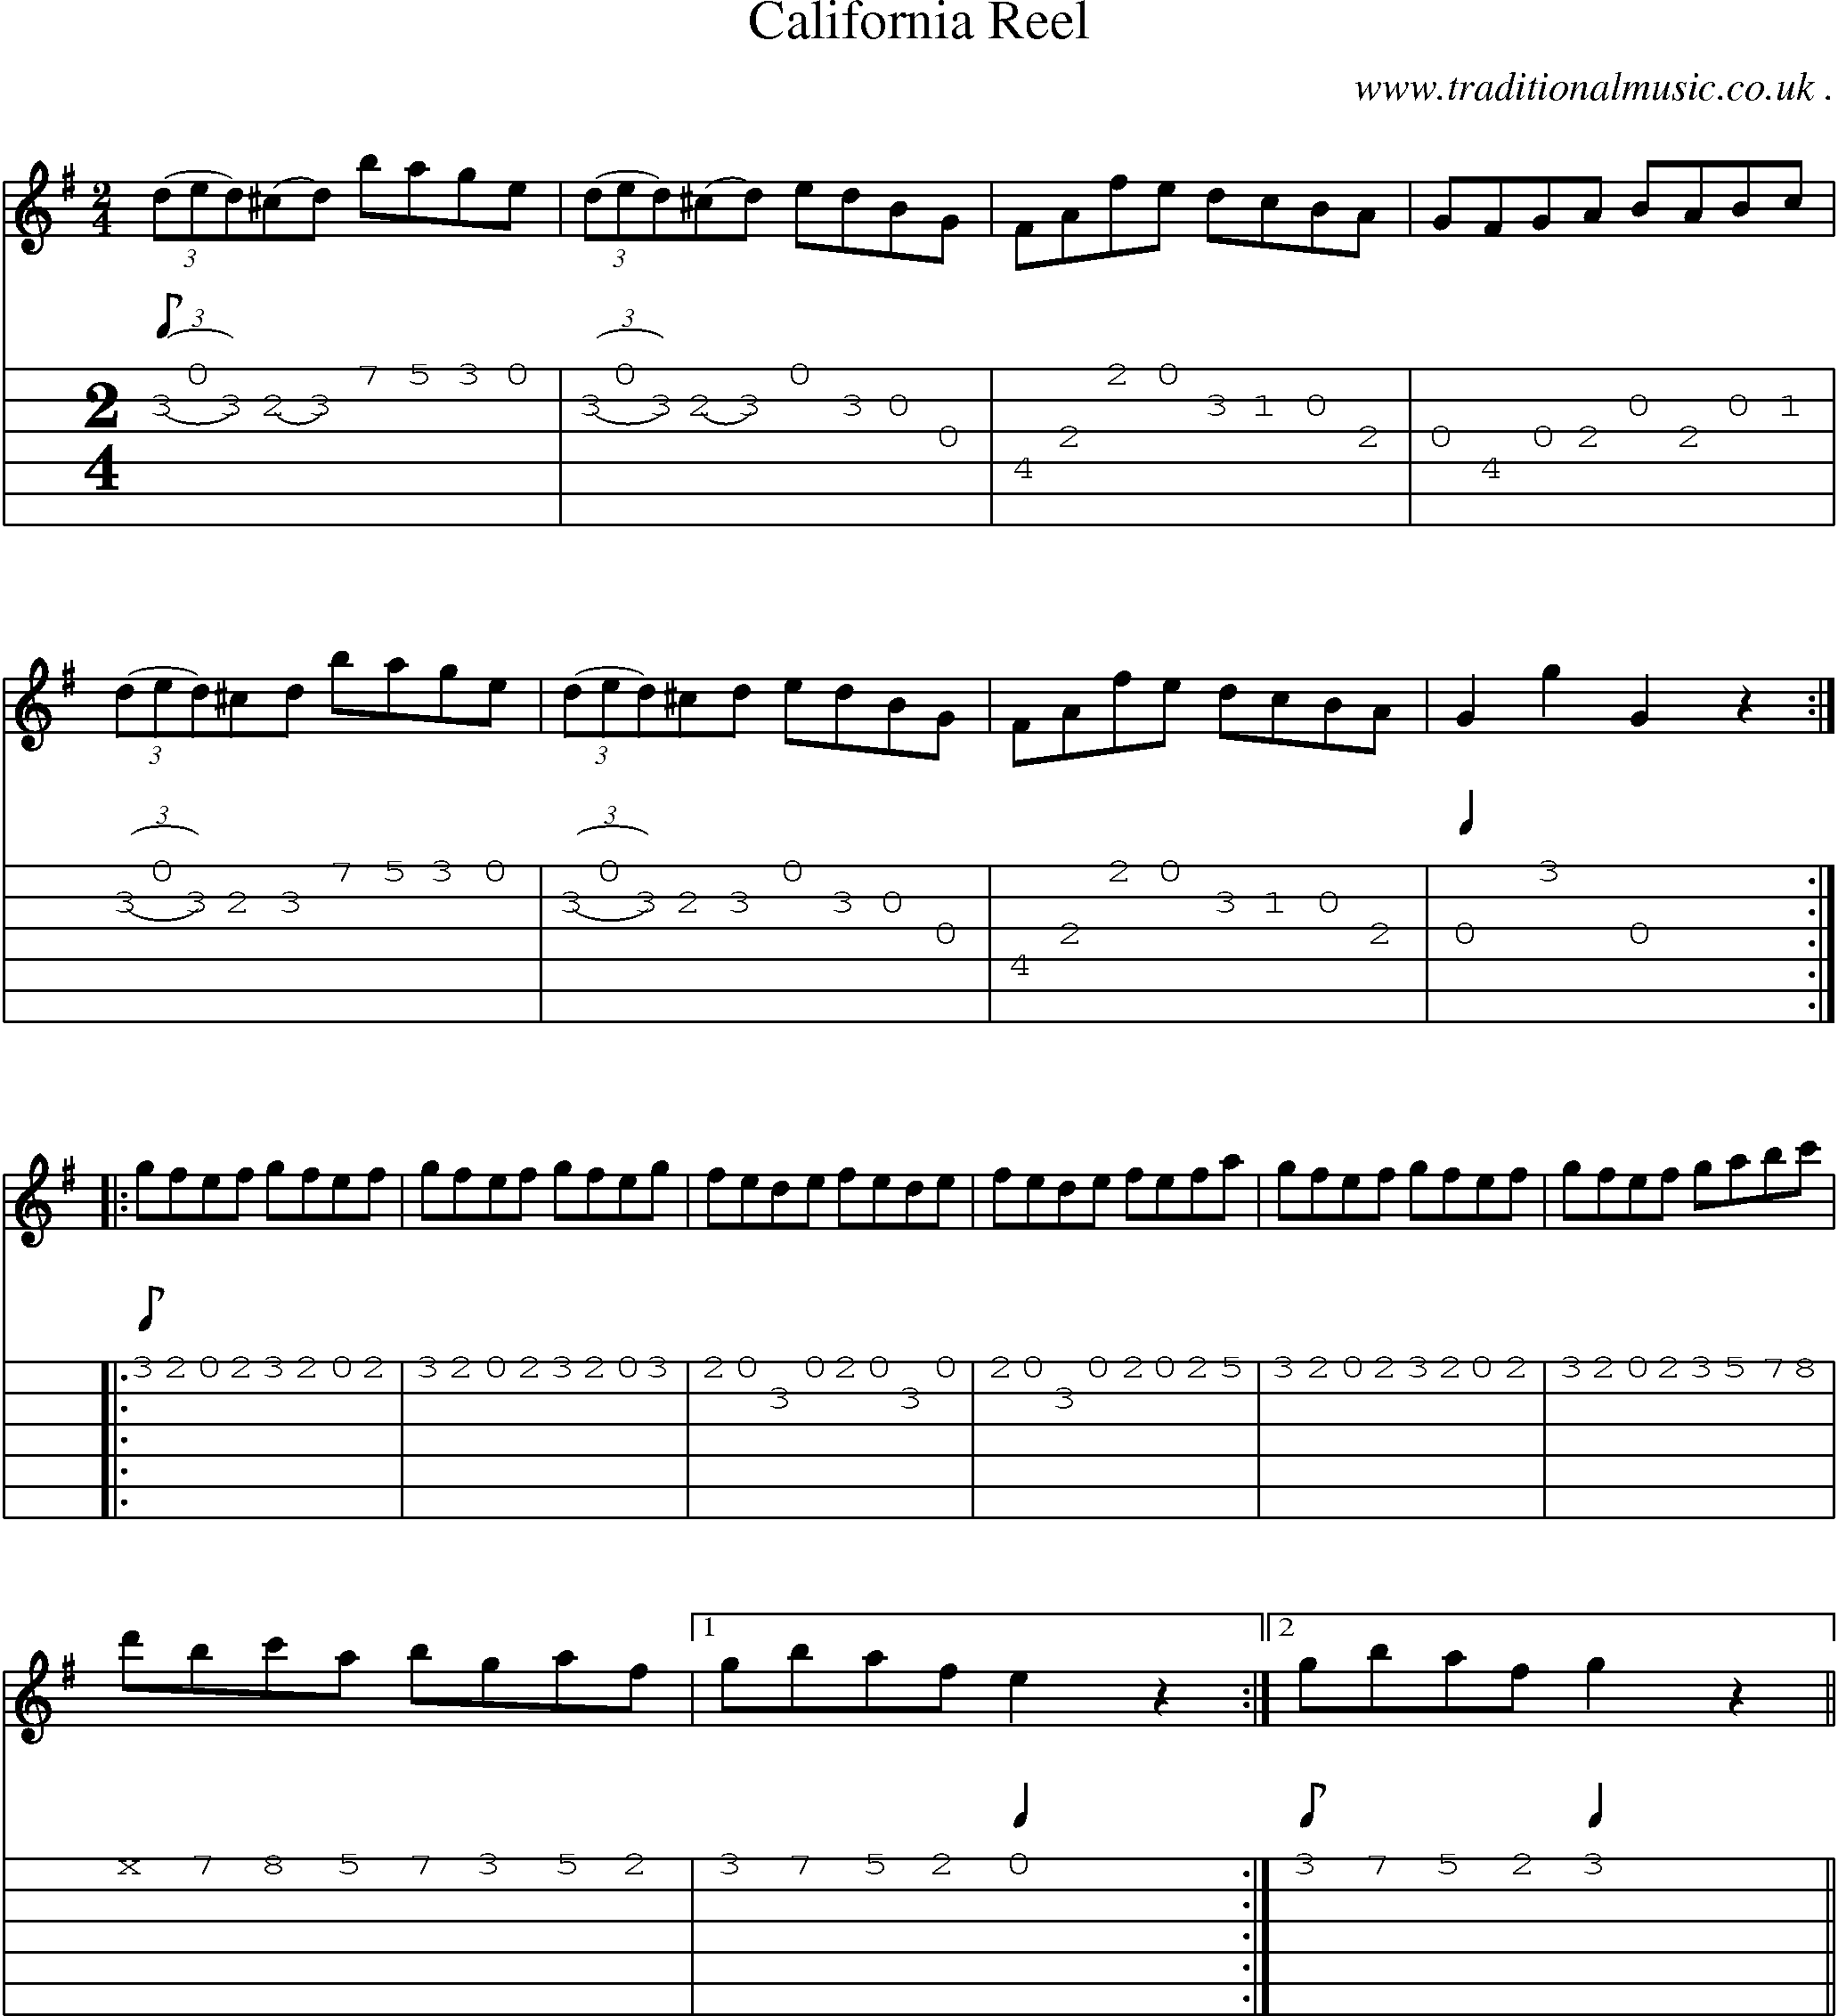 Music Score and Guitar Tabs for California Reel